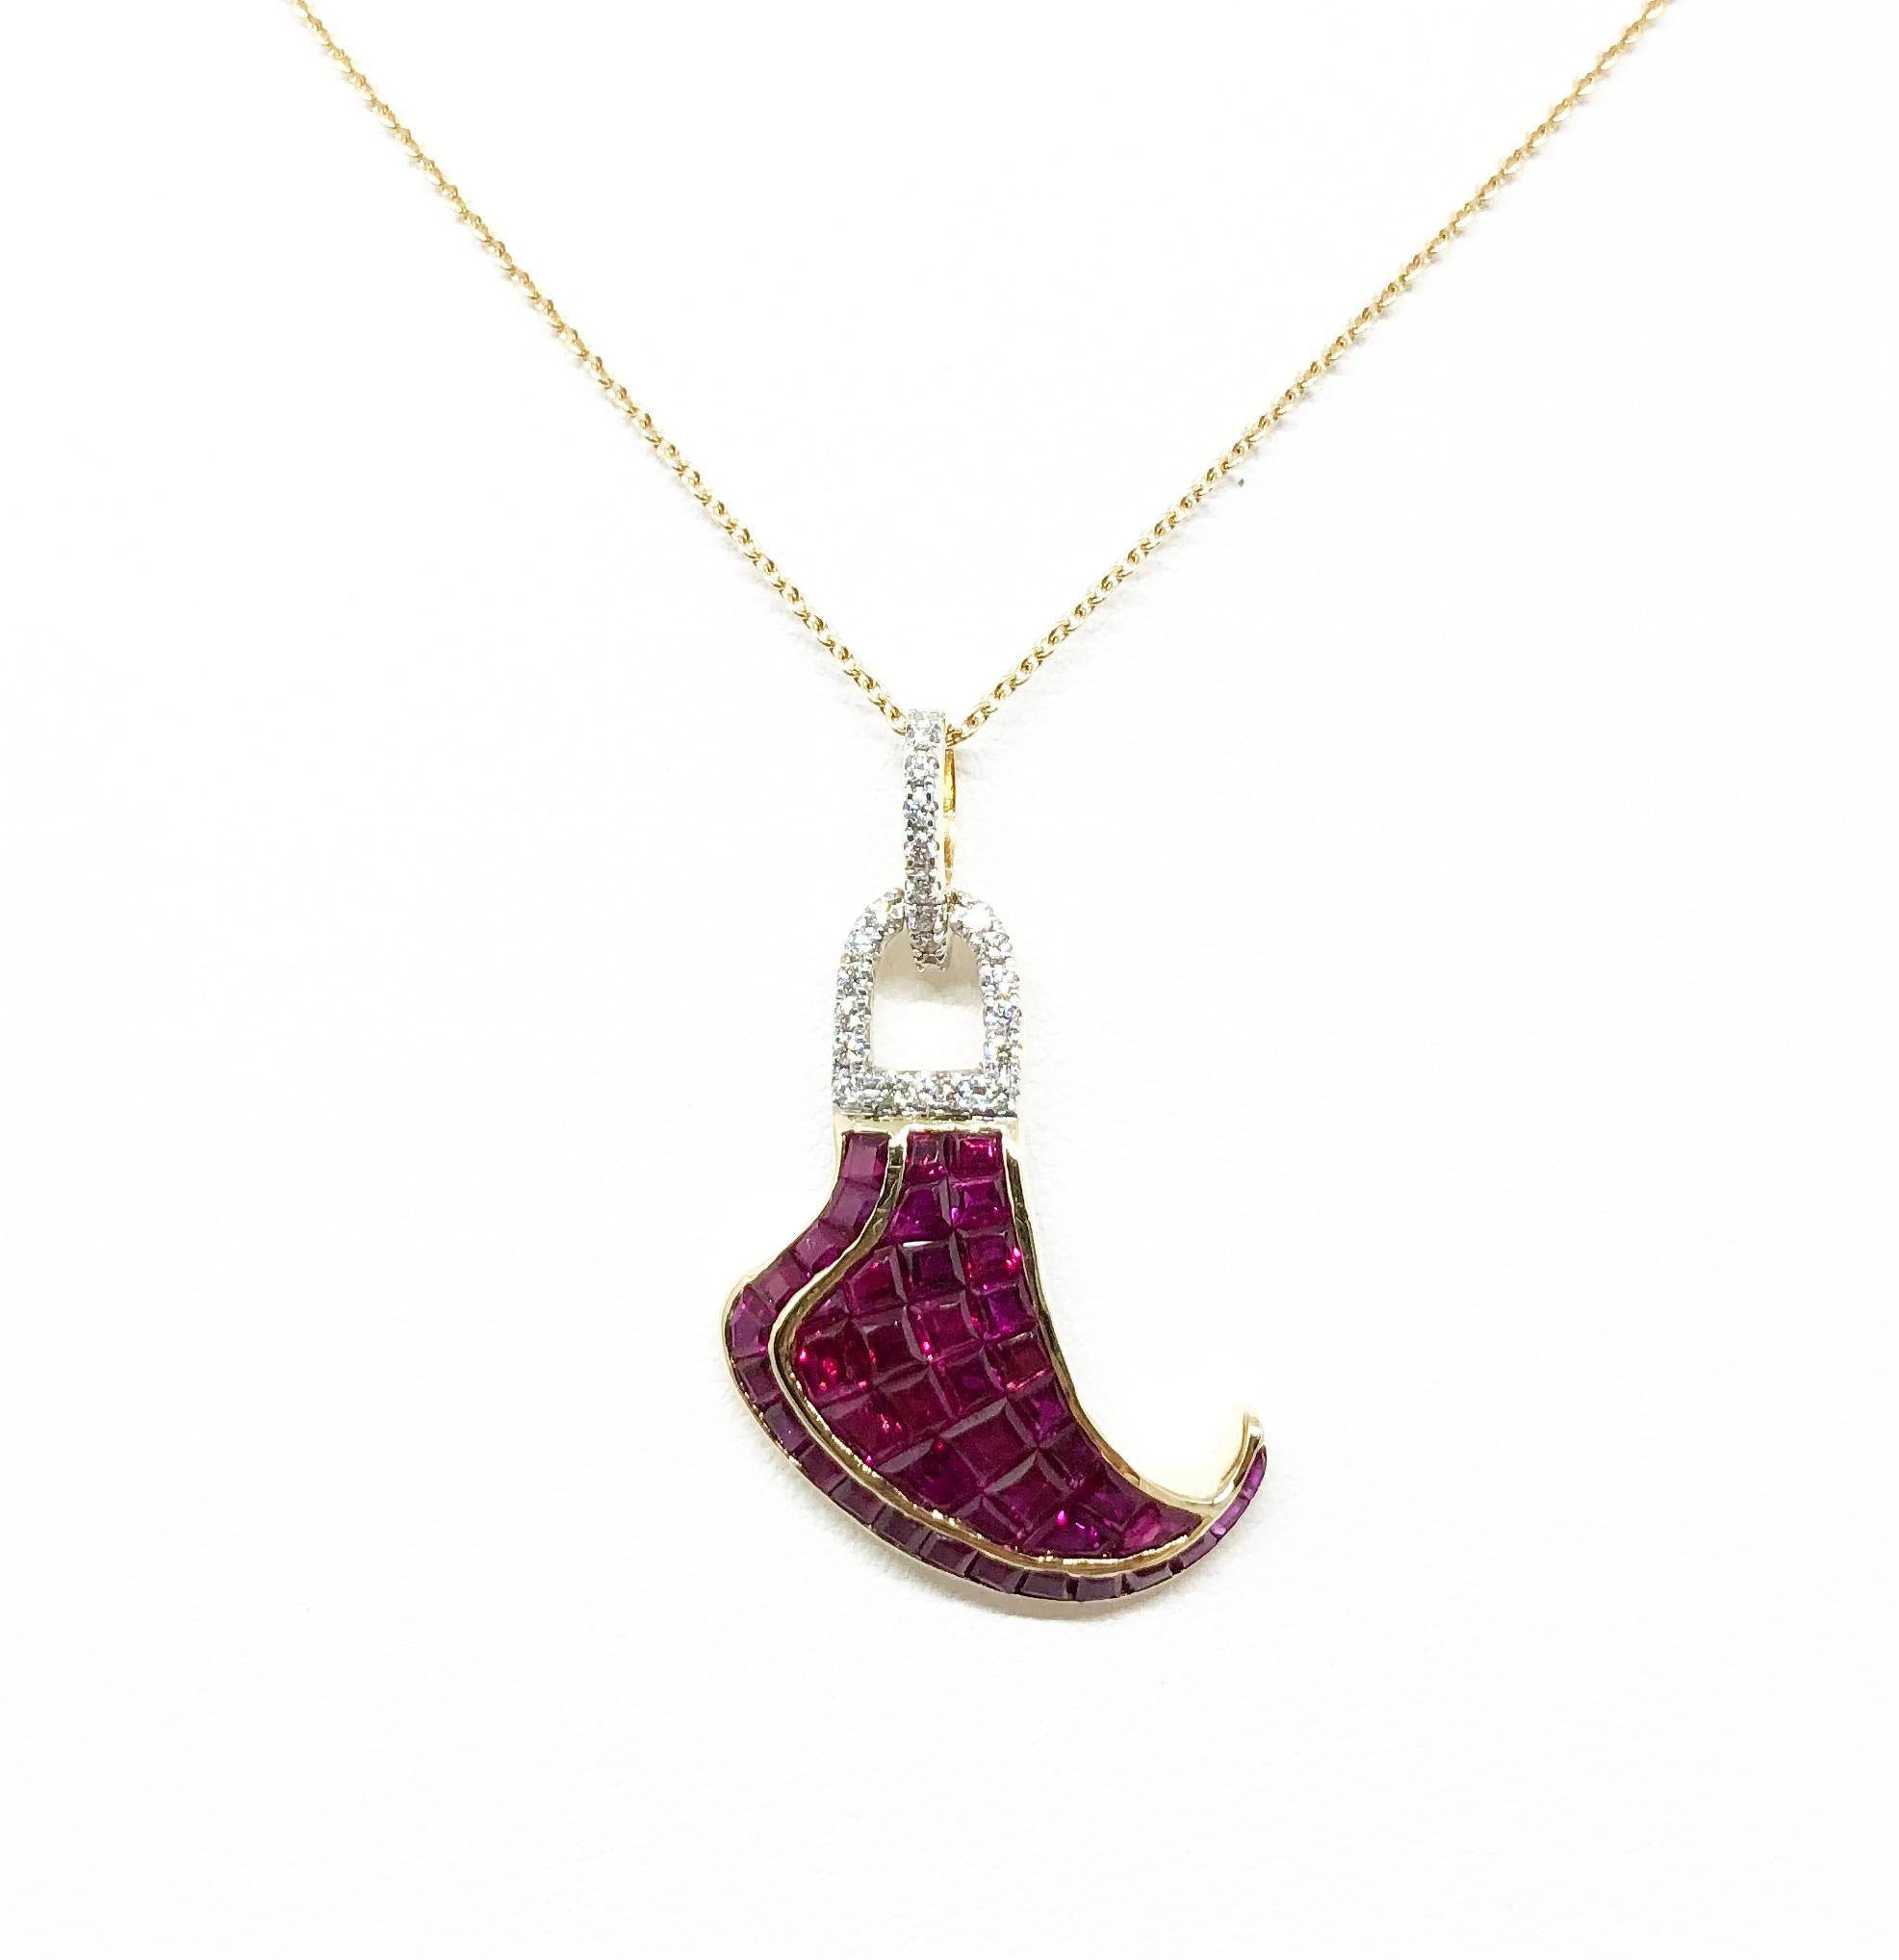 Ruby 2.30 carats with Diamond 0.13 carat Pendant set in 18 Karat Gold Settings
(chain not included)

Width: 2.7 cm 
Length: 3.0 cm
Total Weight: 5.01 grams

